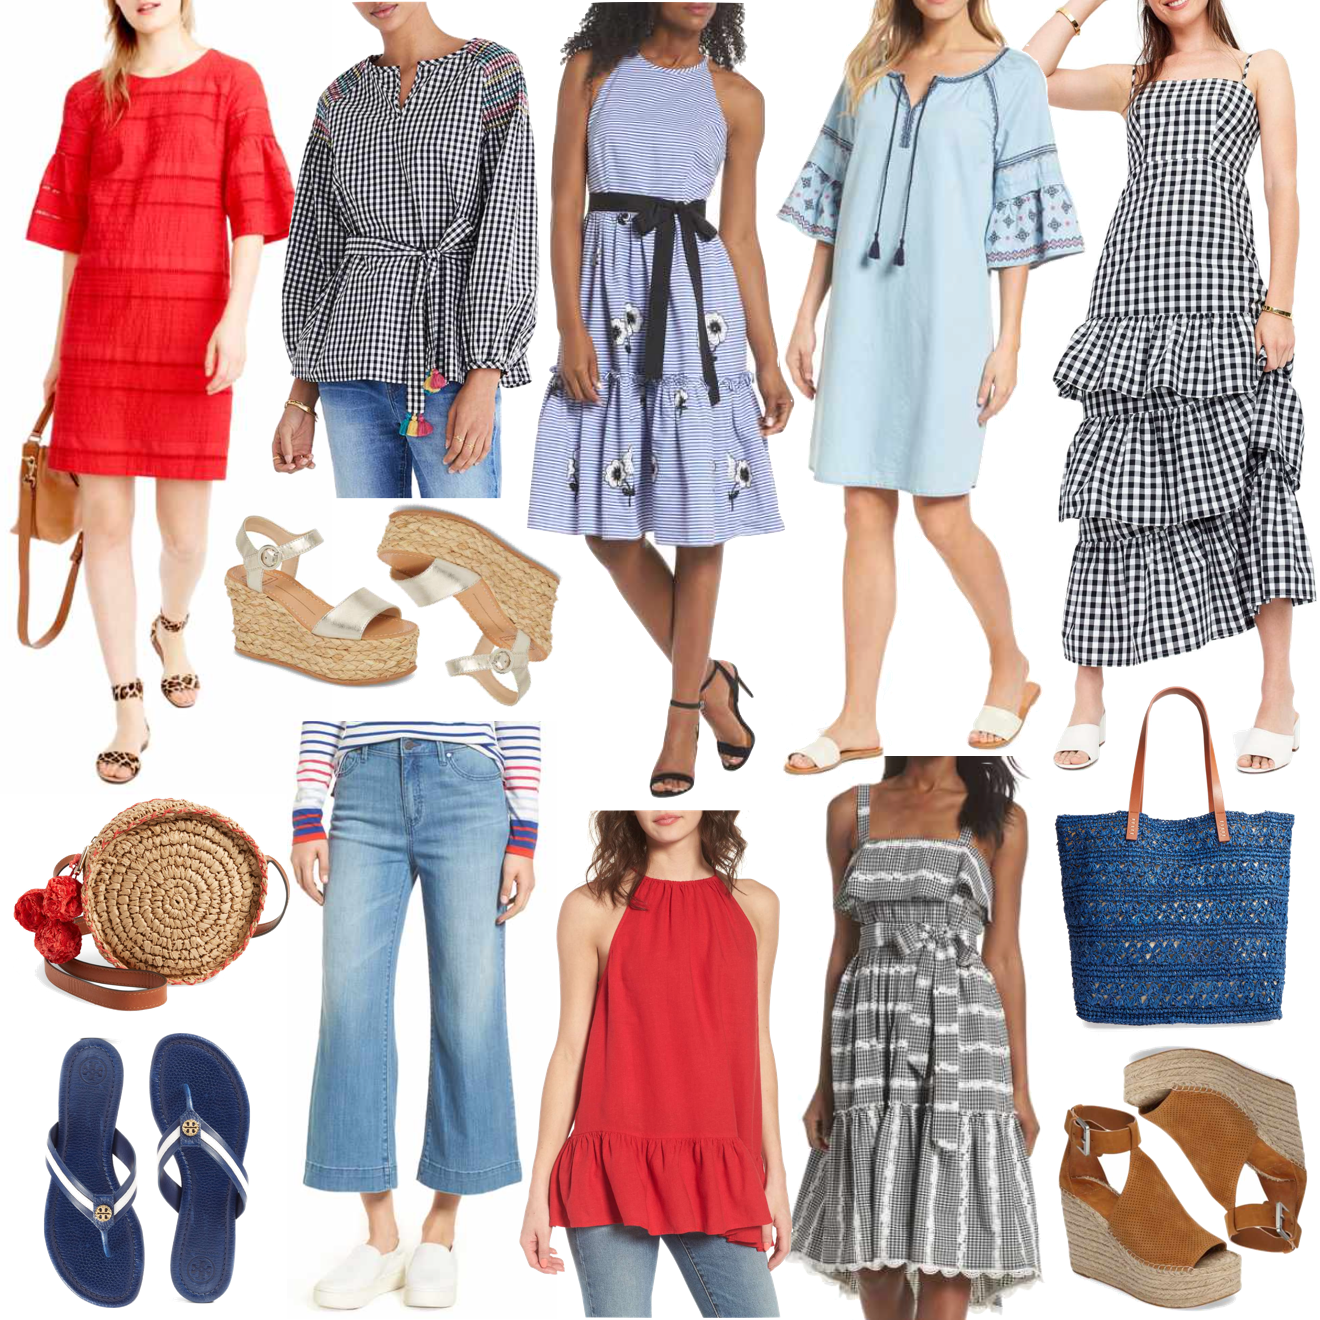 nordstrom-half-yearly-sale-memorial-day-2018